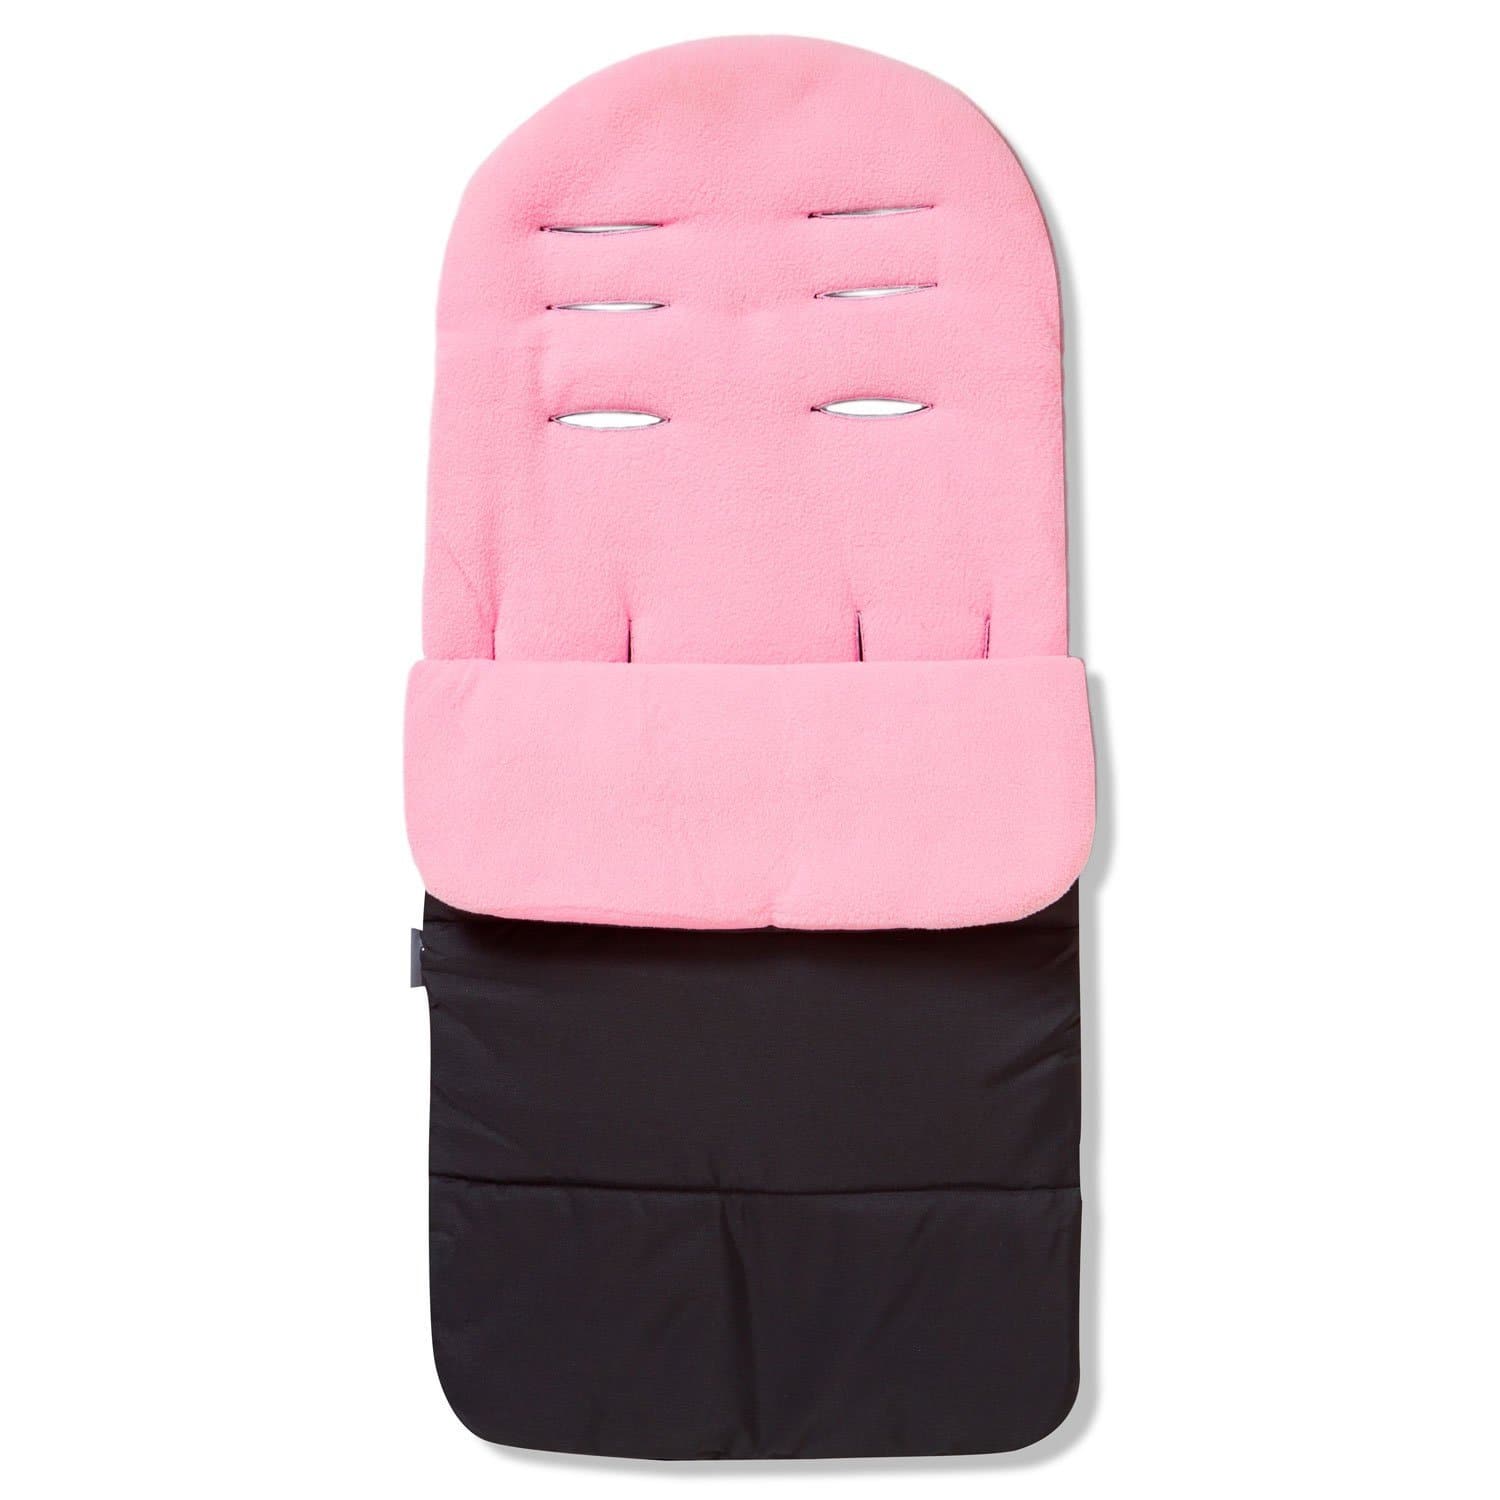 Premium Footmuff / Cosy Toes Compatible with Mamas & Papas - Candy Pink / Fits All Models | For Your Little One